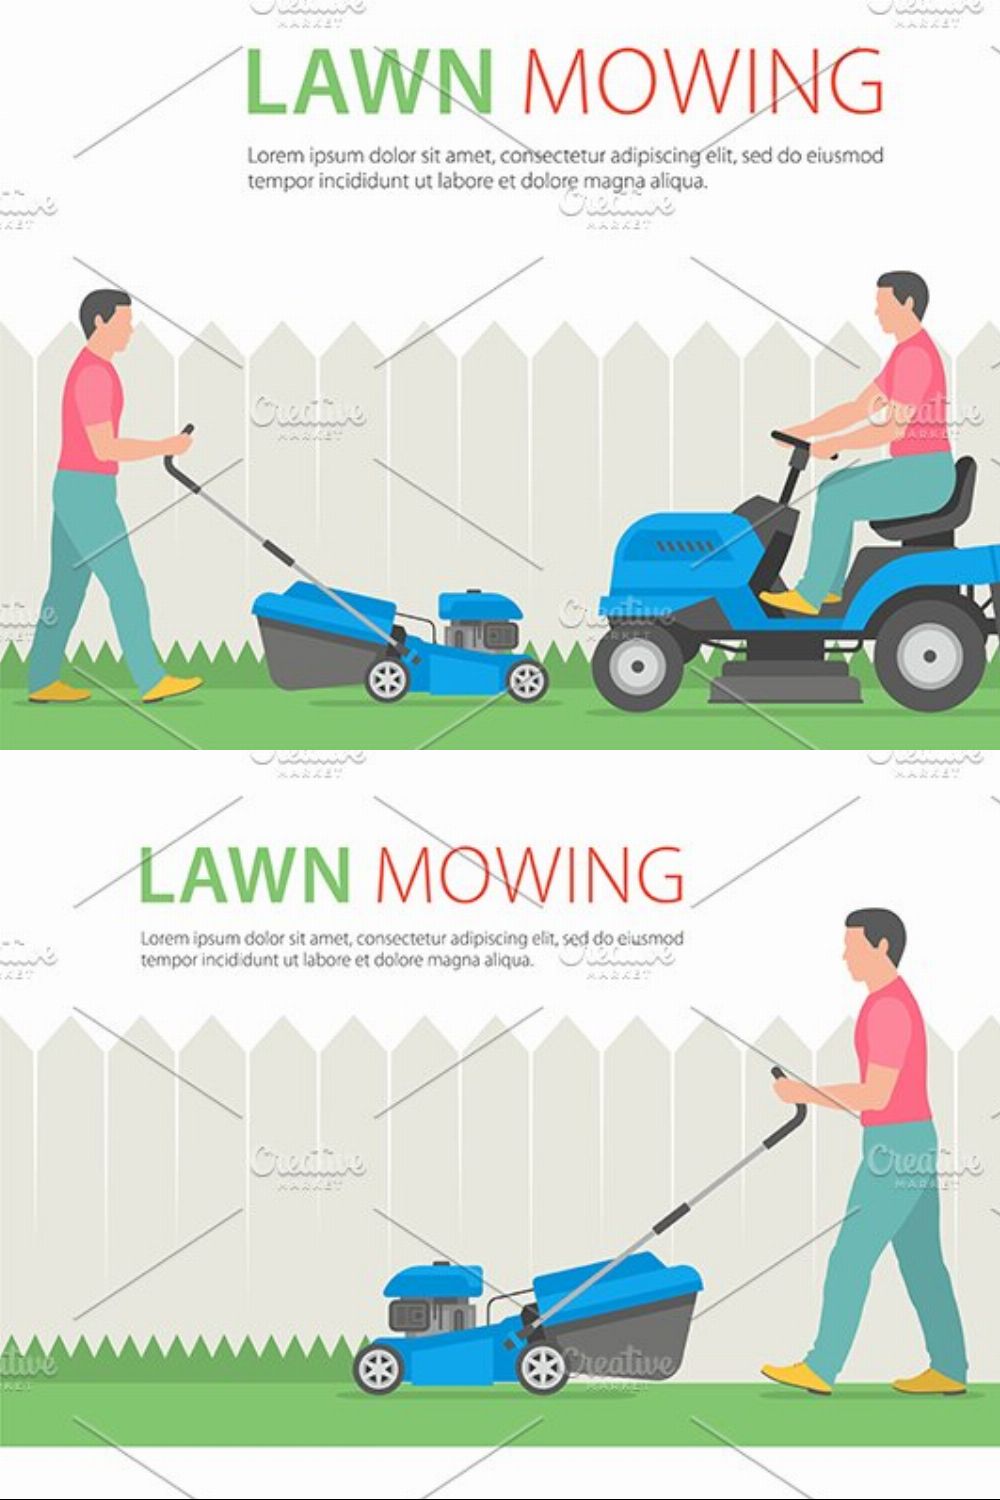 Man on tractor lawnmower pinterest preview image.